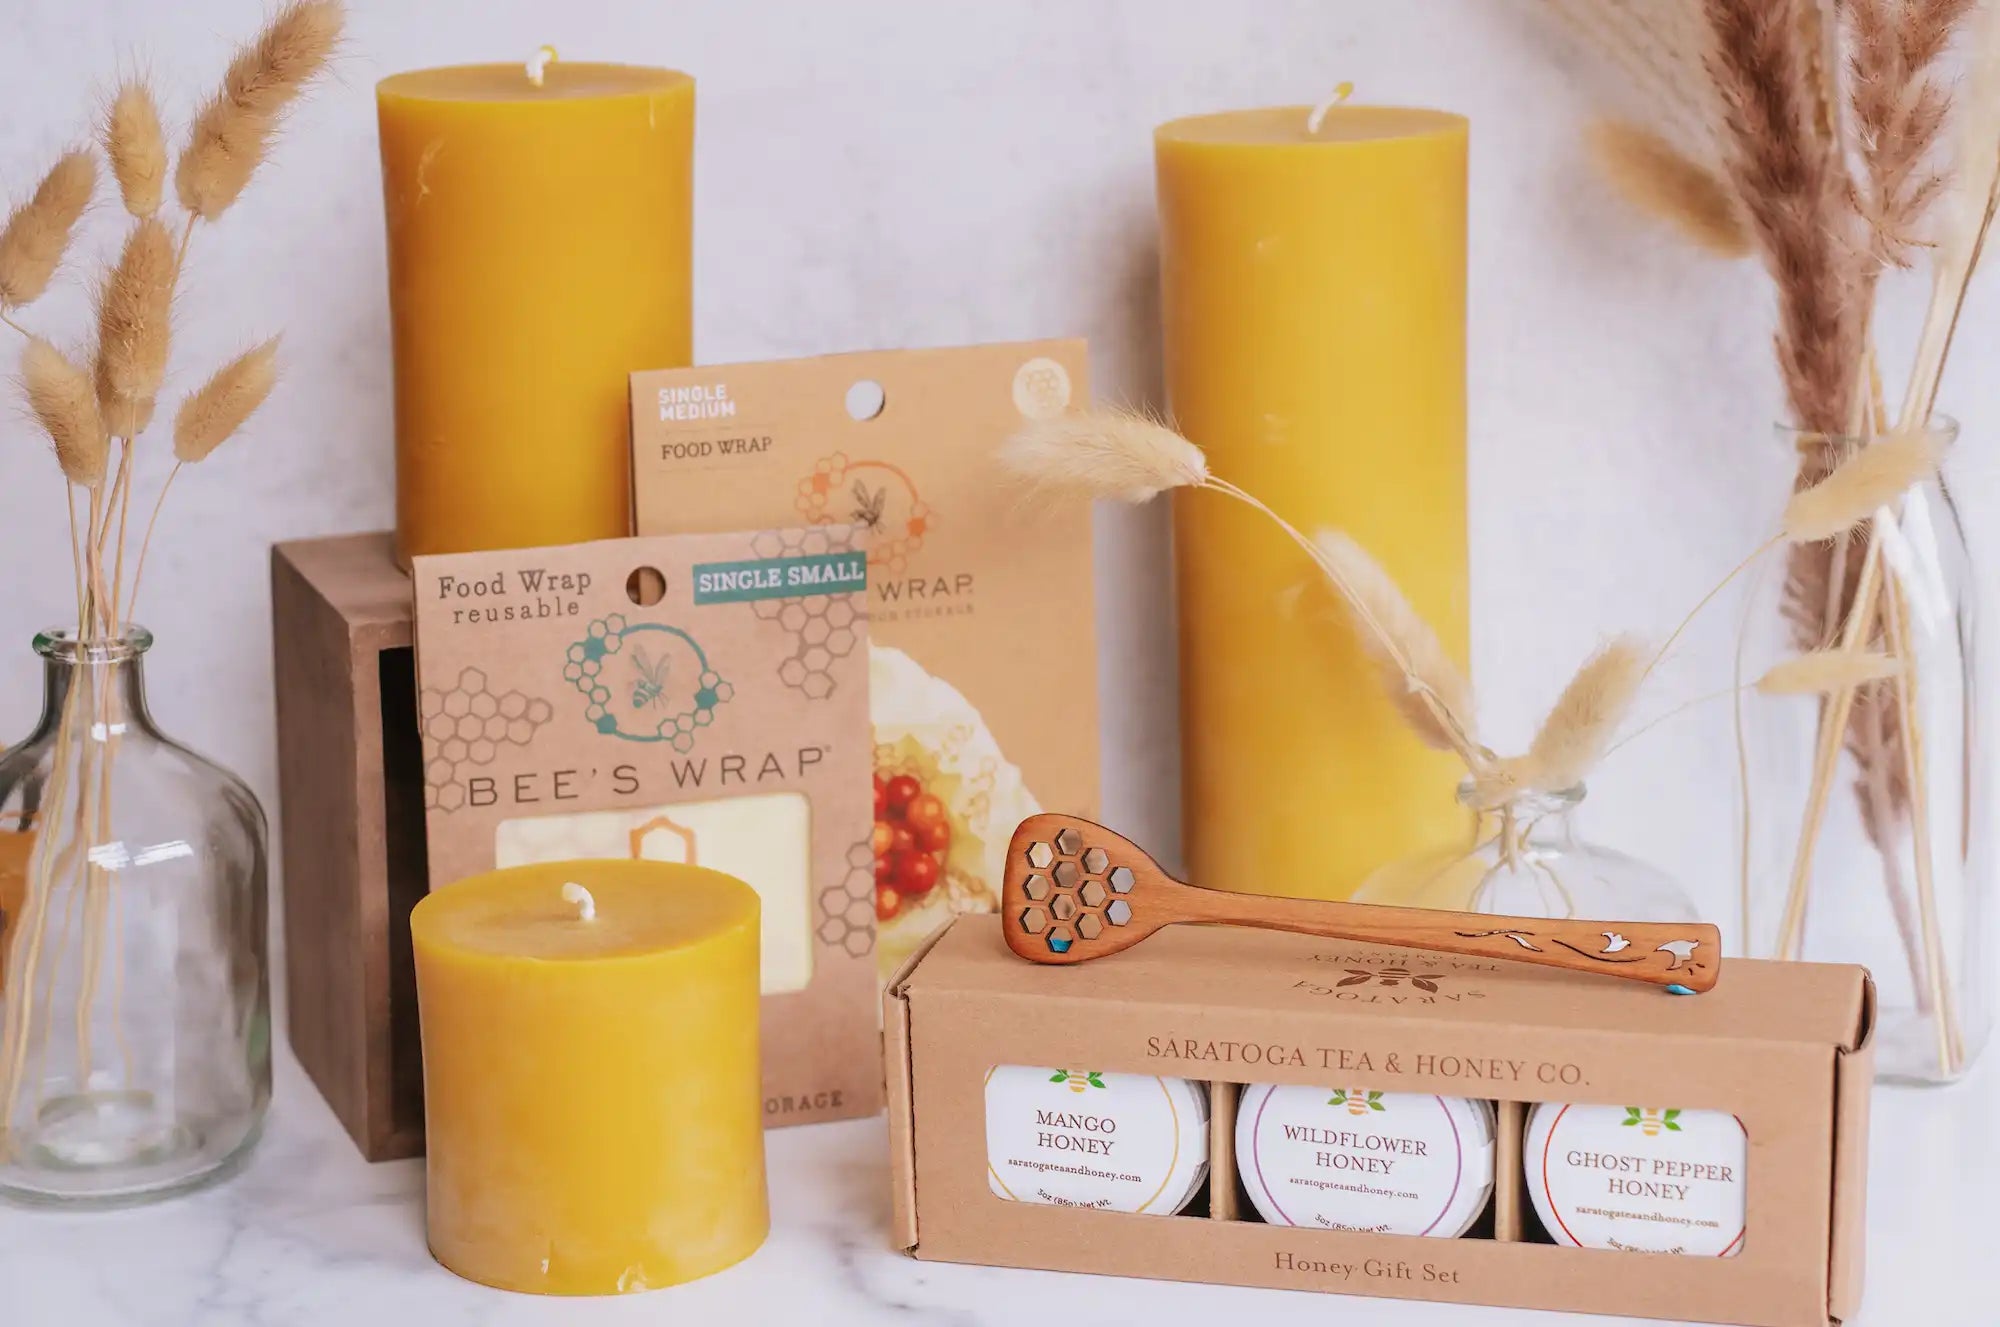 beeswax candles, beeswrap, honey accessories, and honey gifts